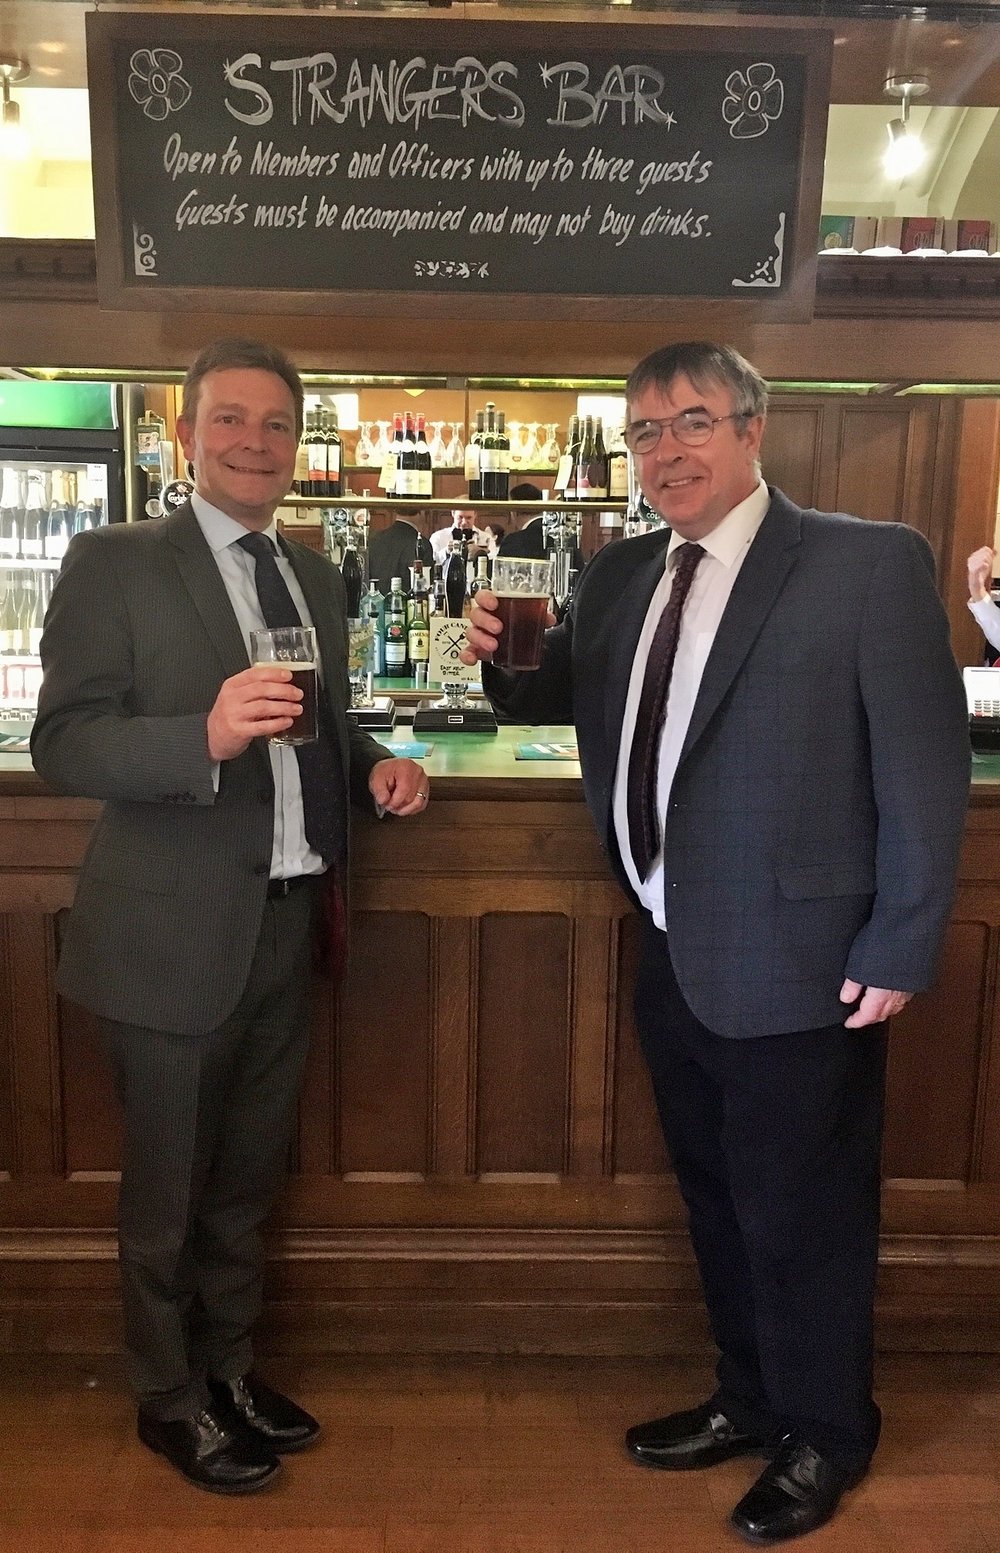 Beer brewed at the Four Candles Alehouse in Broadstairs goes on sale in  House of Commons bar — Craig Mackinlay MP